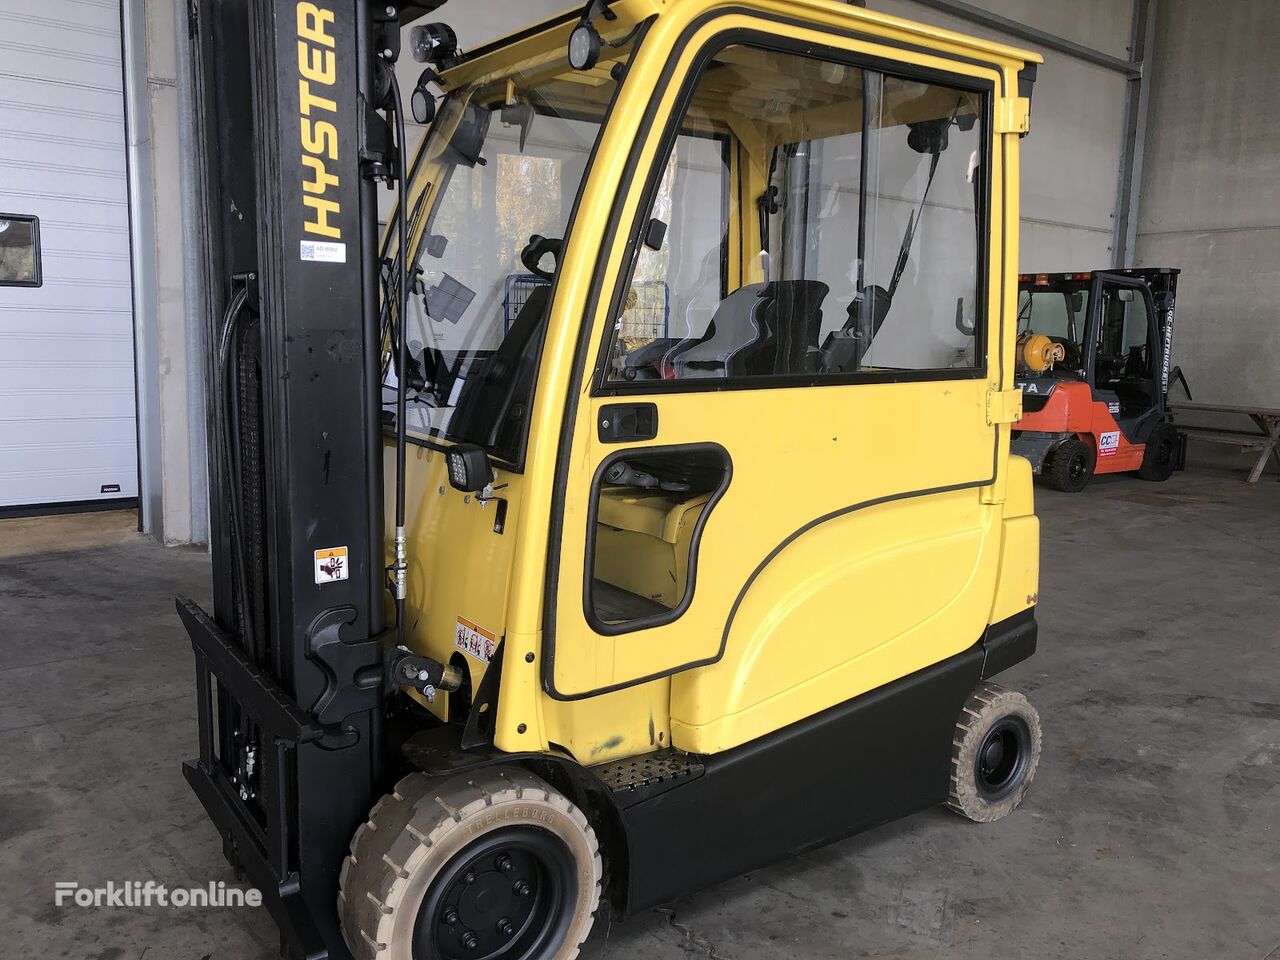 Hyster J3.0XN electric forklift